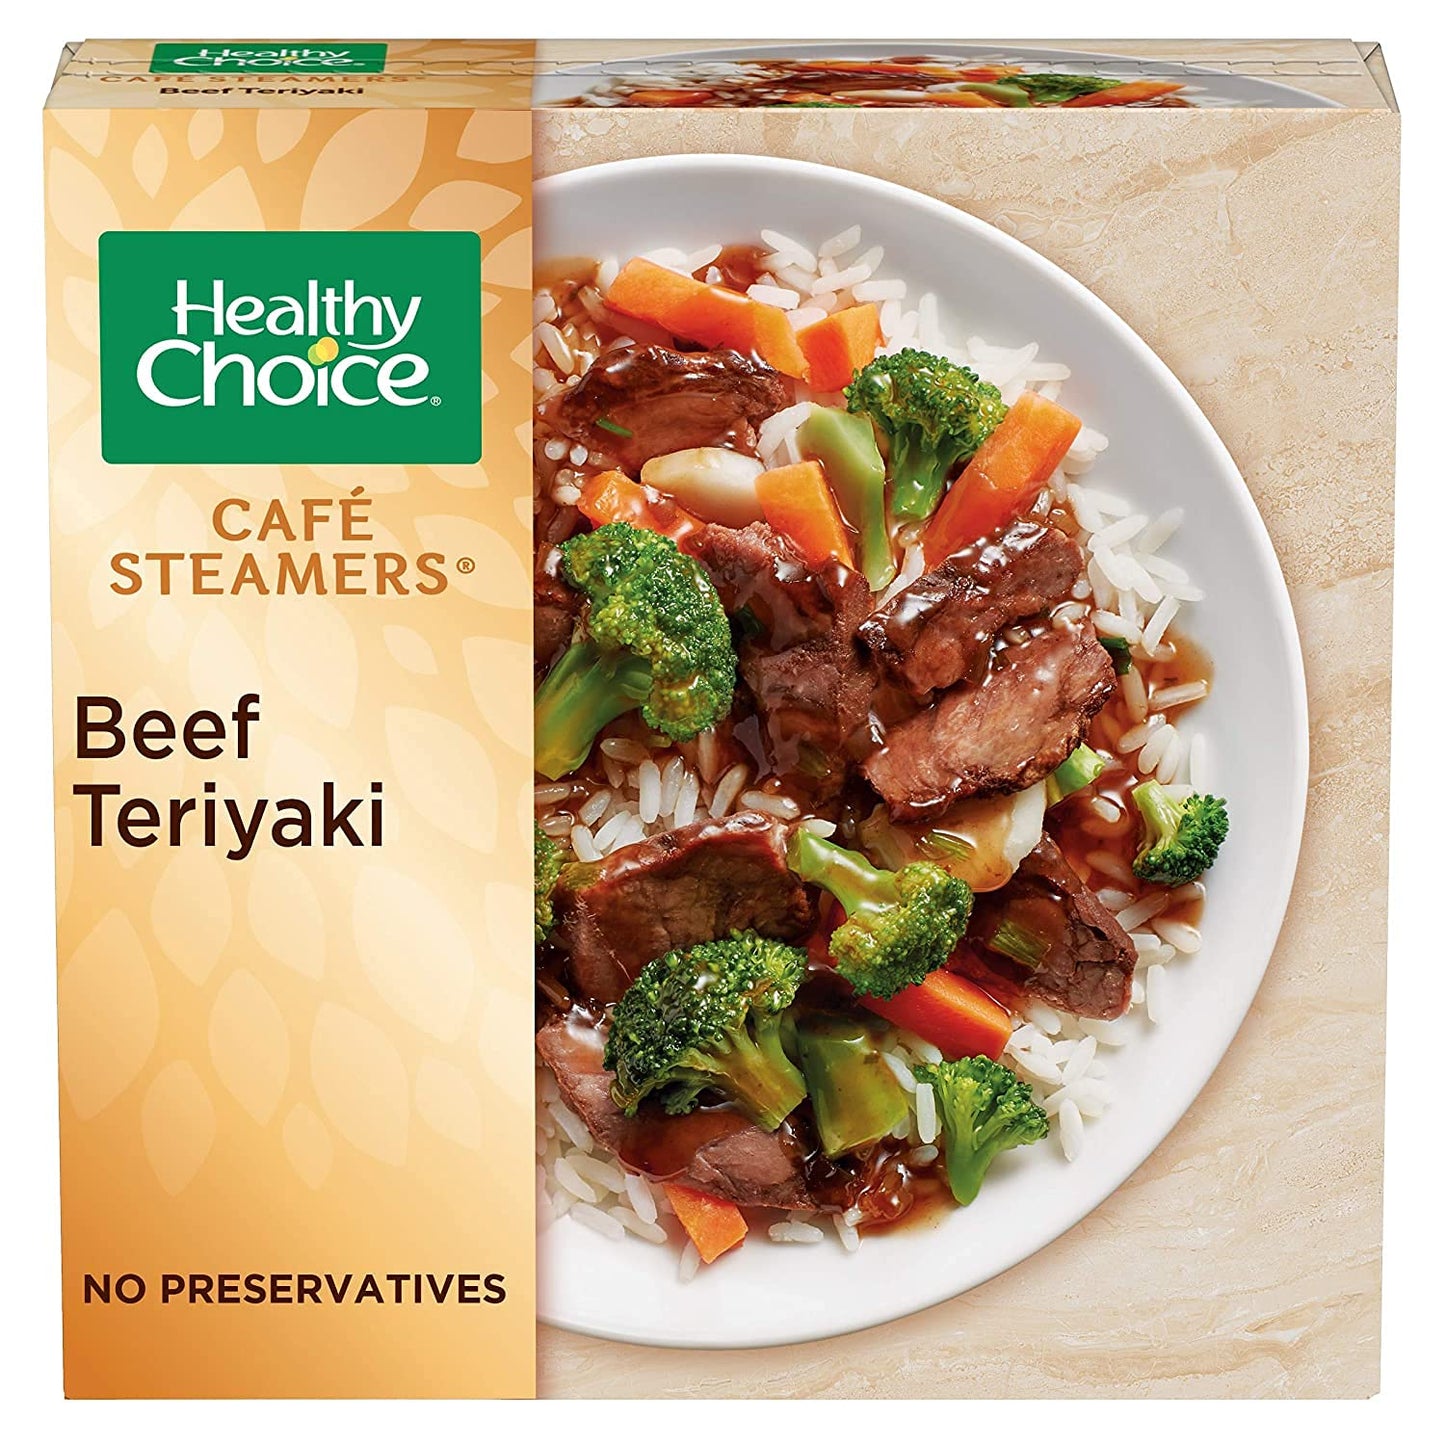 Healthy Choice Café Steamers Variety Pack - 2 Grilled Chicken Marinara with Parmesan - 2 Asian Inspired Beef Teriyaki - 2 Grilled Chicken & Broccoli Alfredo Frozen Meal